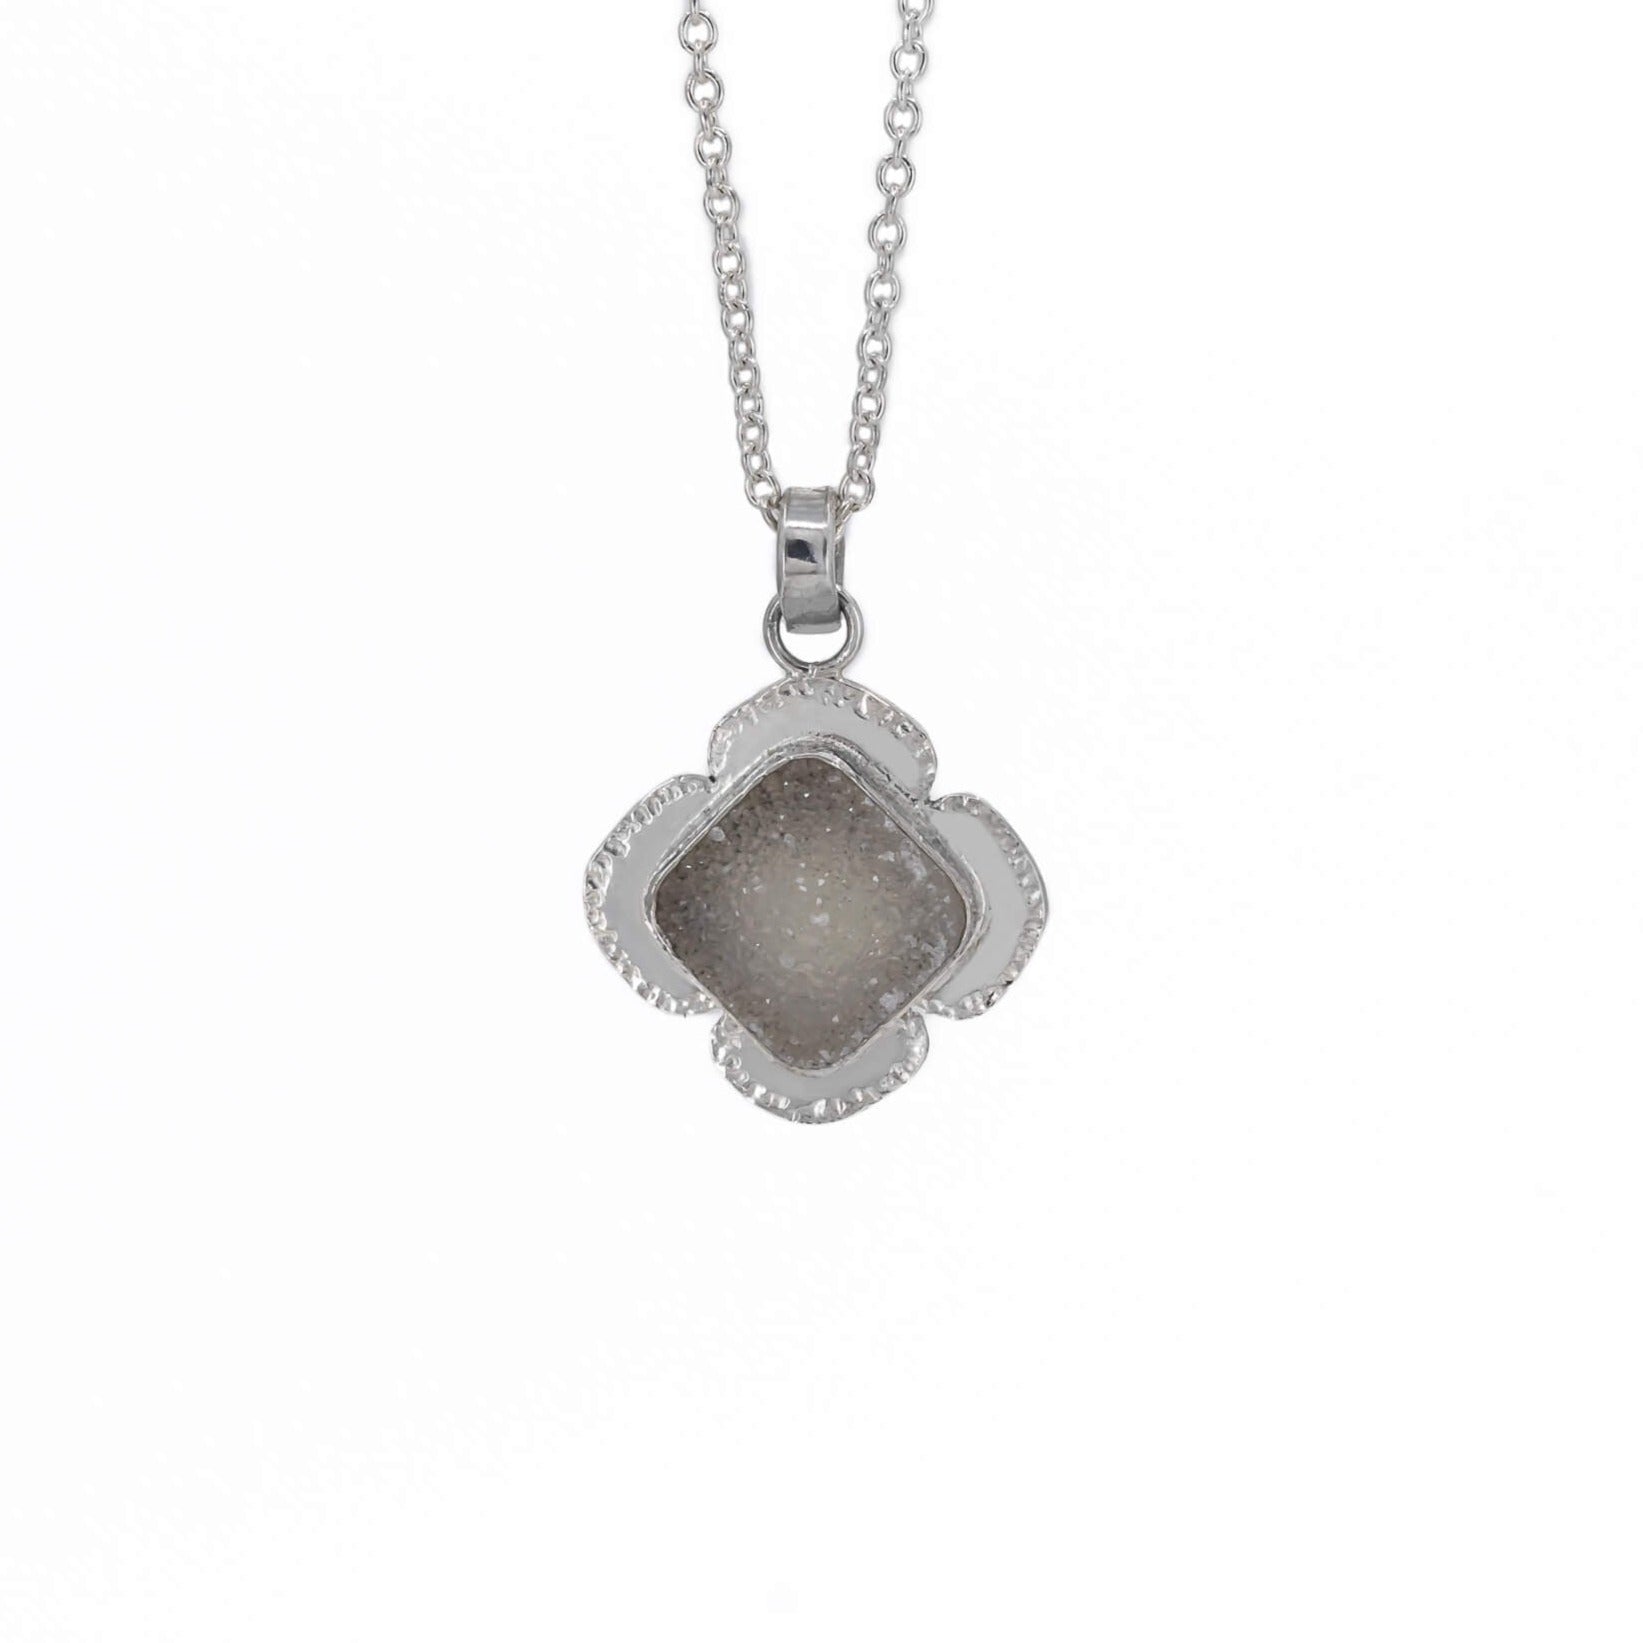 Light pink druzy pendant necklace in sterling silver